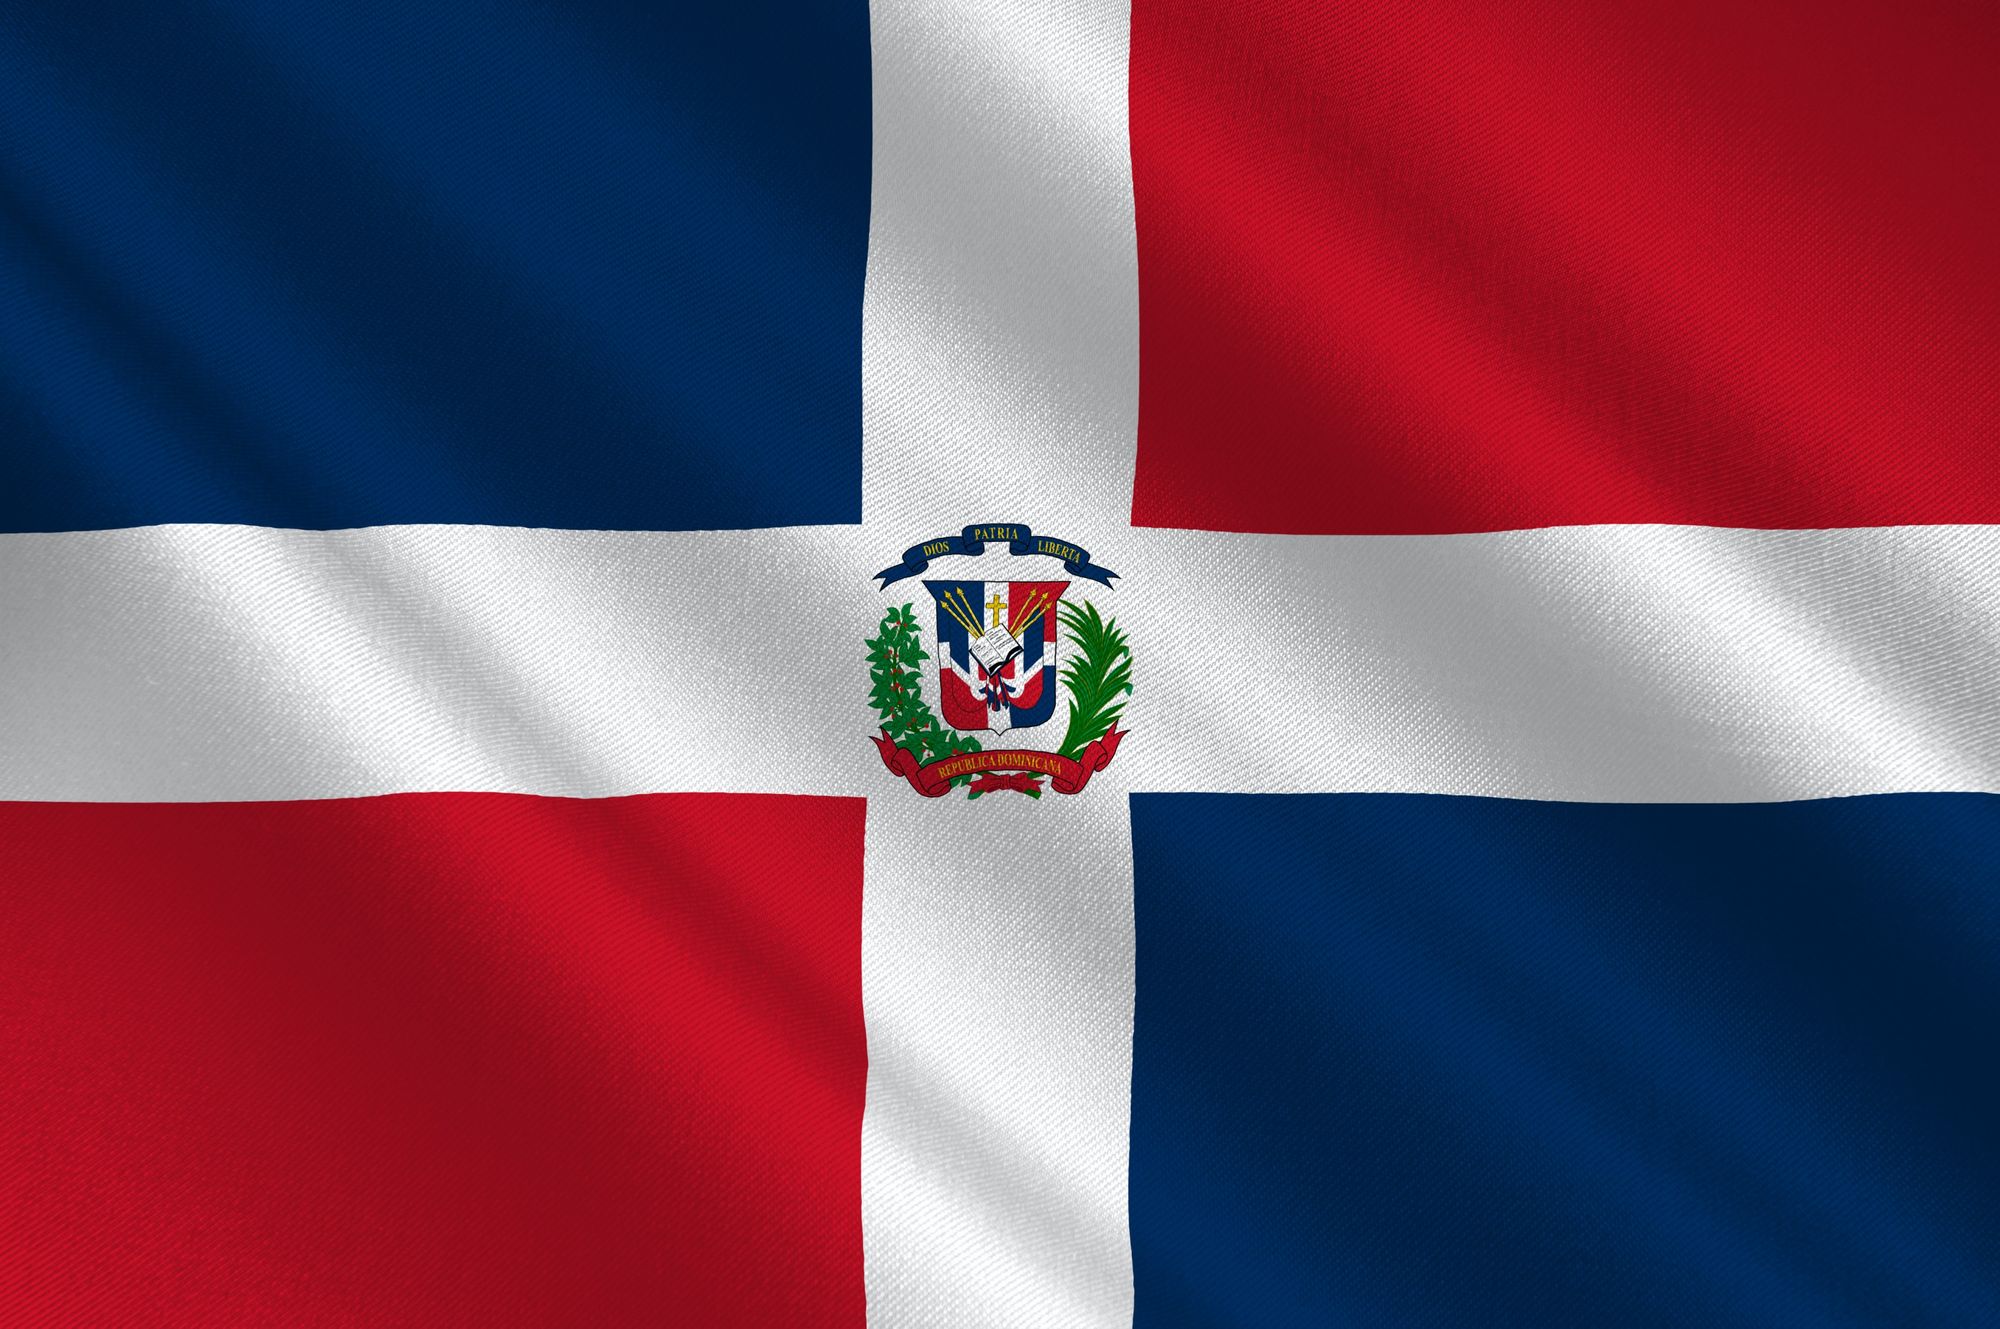 DIDWW expands porting coverage in the Dominican Republic